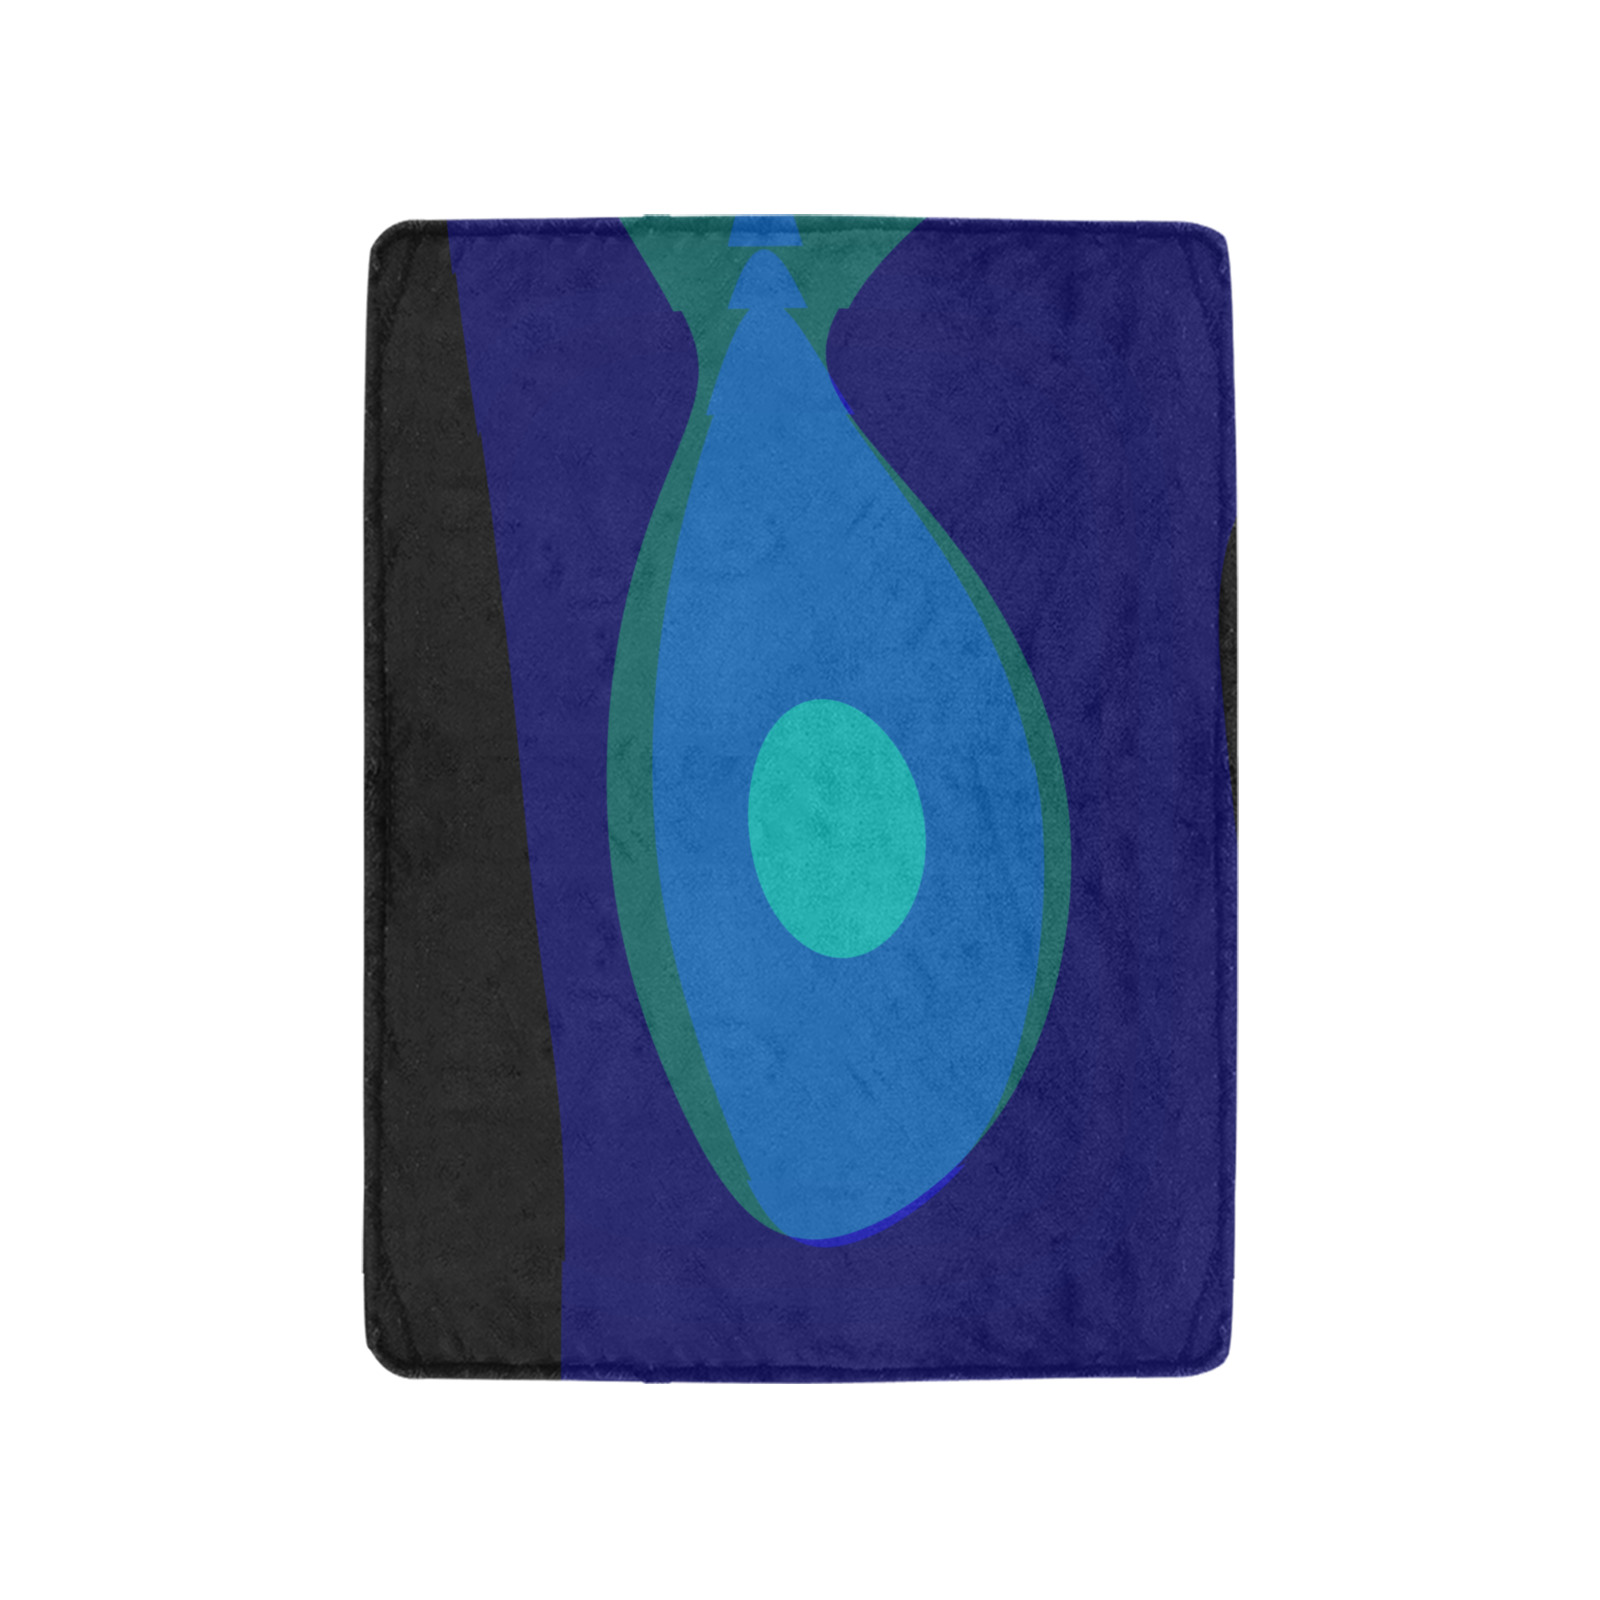 Dimensional Blue Abstract 915 Ultra-Soft Micro Fleece Blanket 30"x40" (Thick)